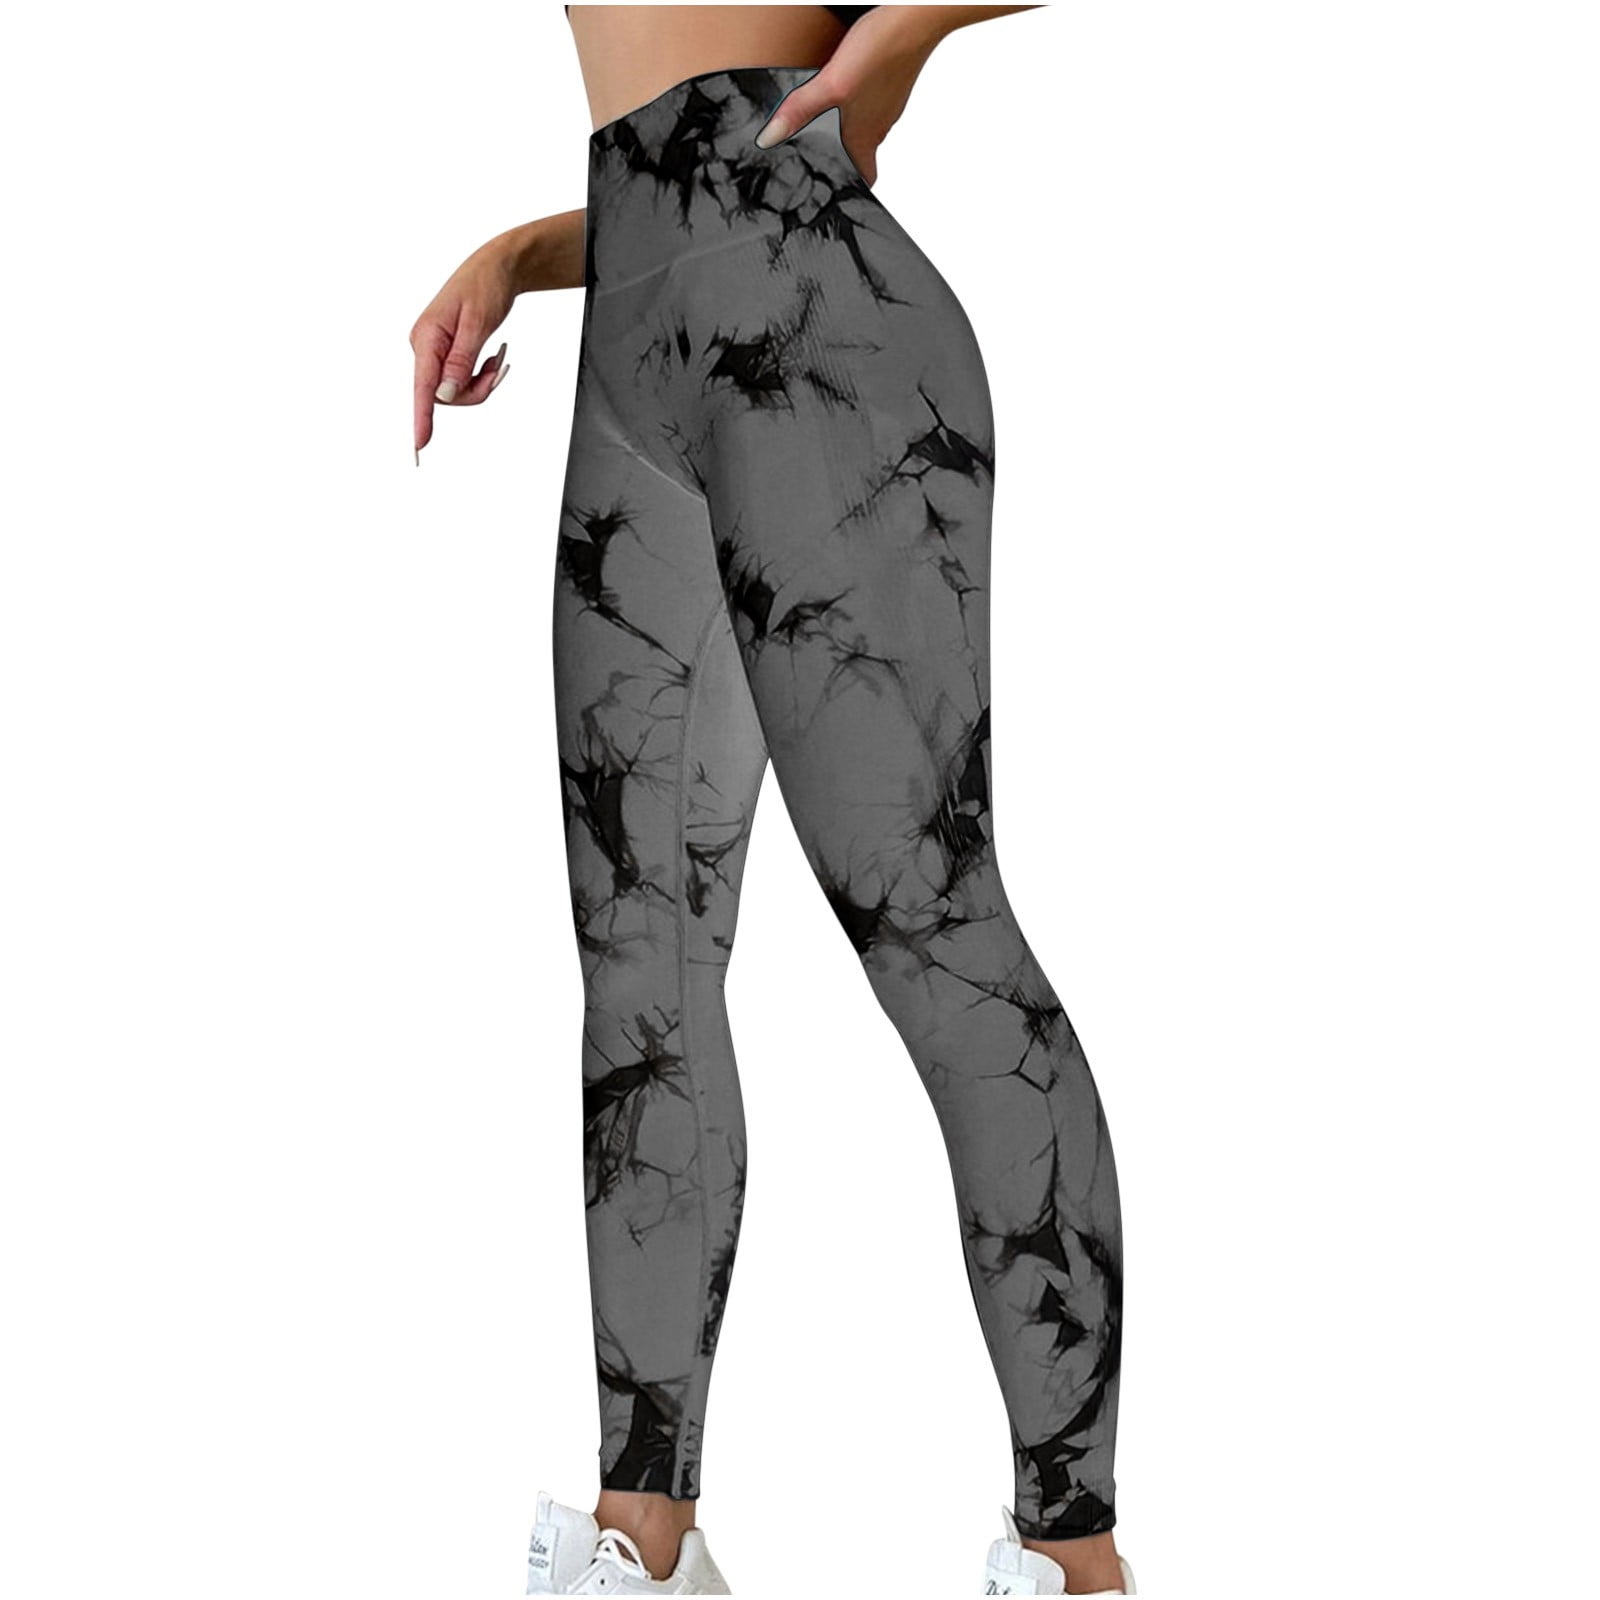 Grey Camo Yoga Leggings Women, Camouflage High Waisted Pants Cute Printed  Workout Running Gym Designer Tights -  Canada